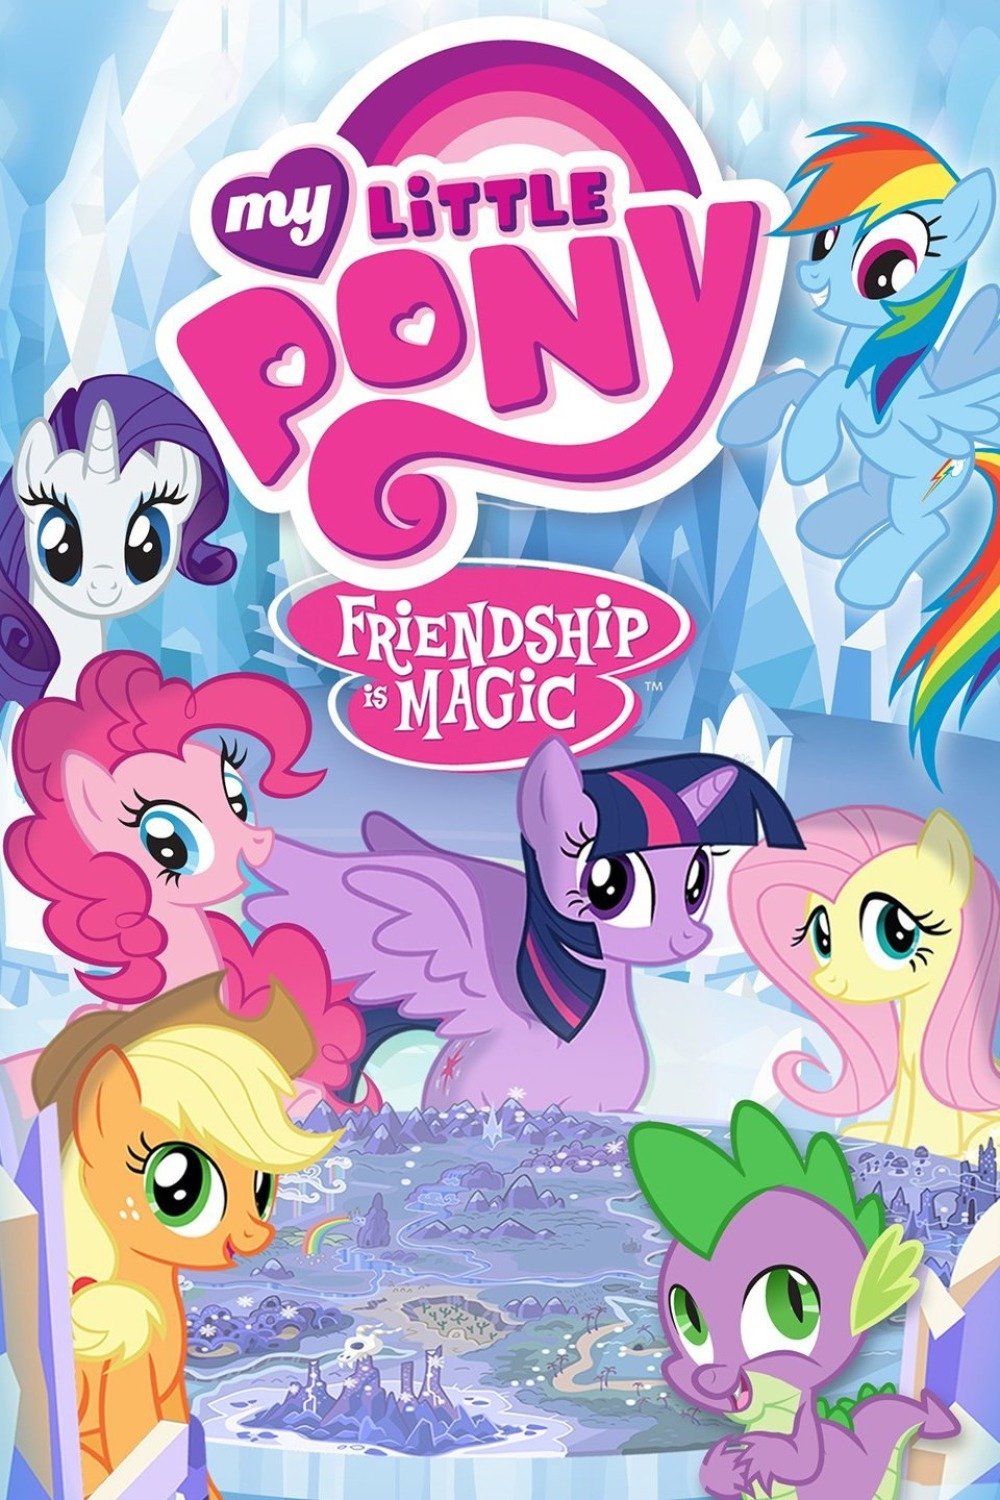 My Little Pony Friendship is Magic TV Show Poster ID 95981 Image